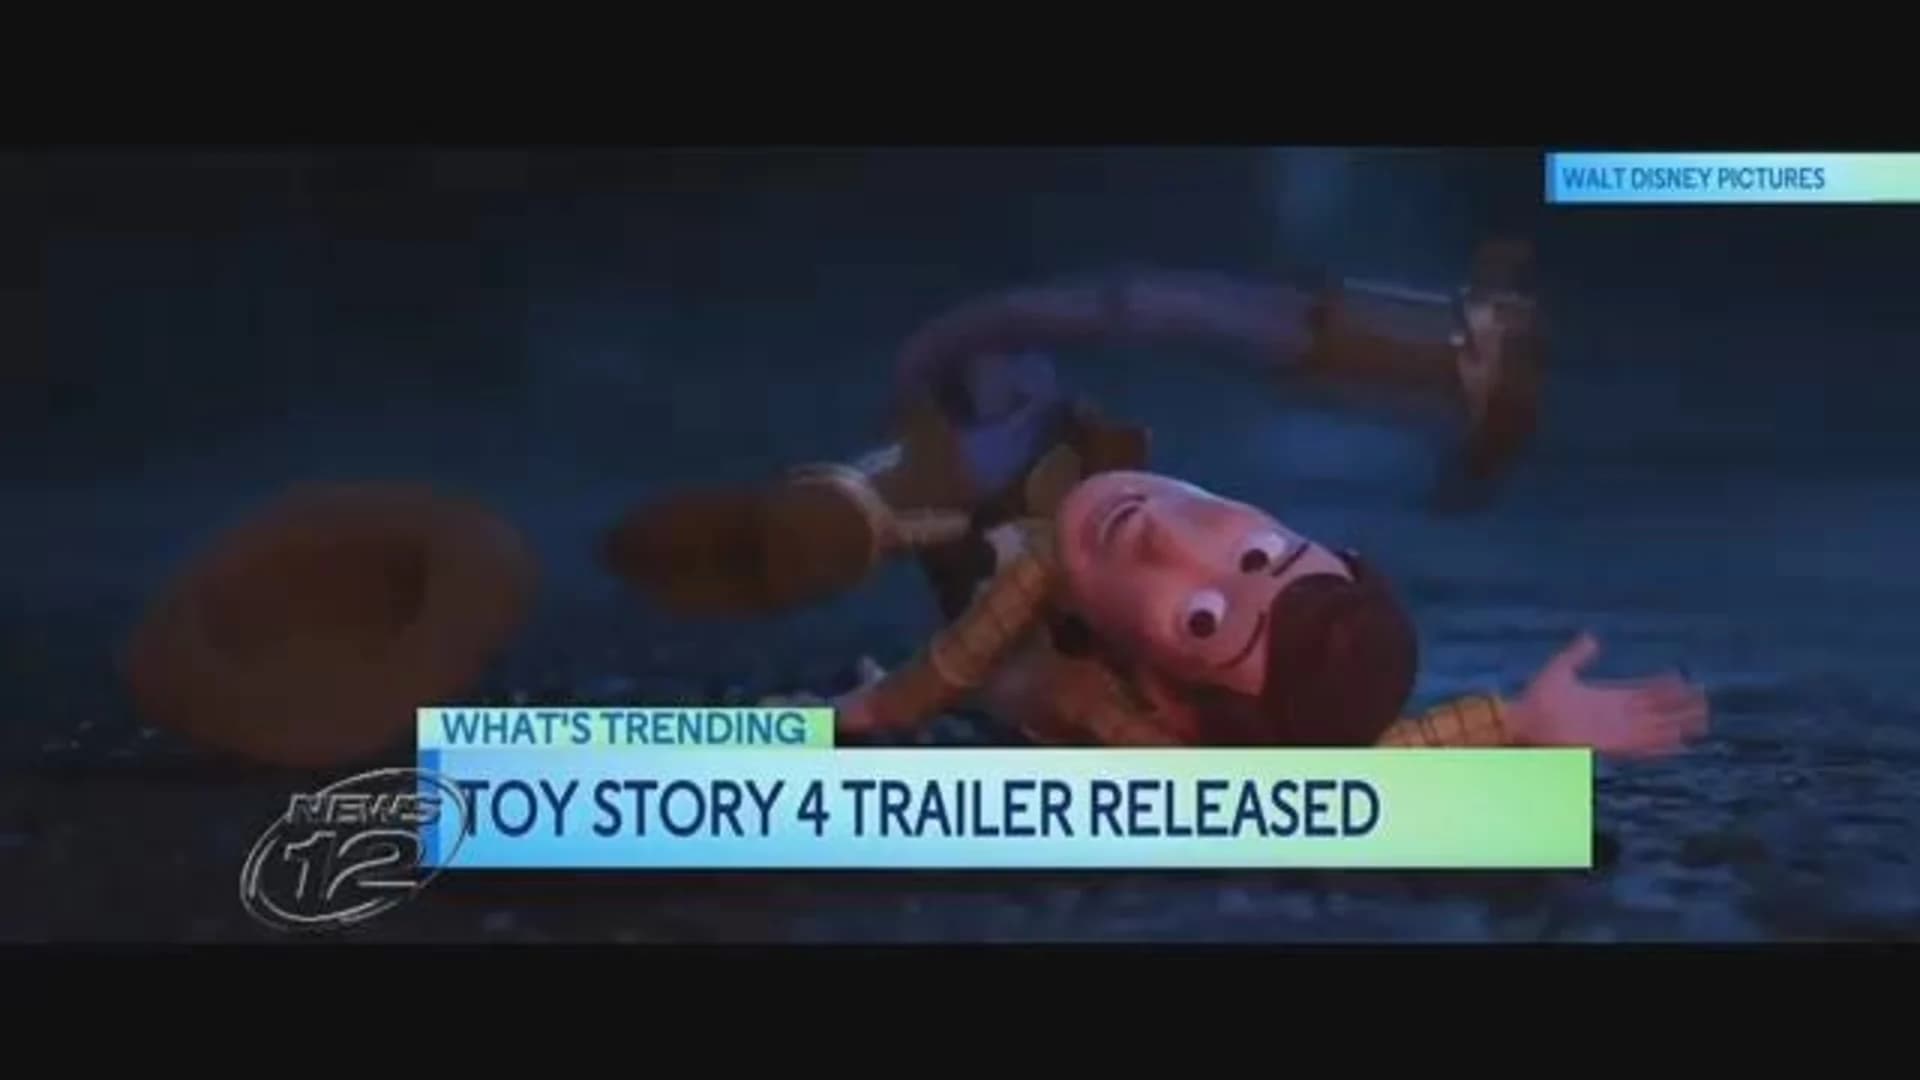 WATCH: Toy Story 4 new trailer released